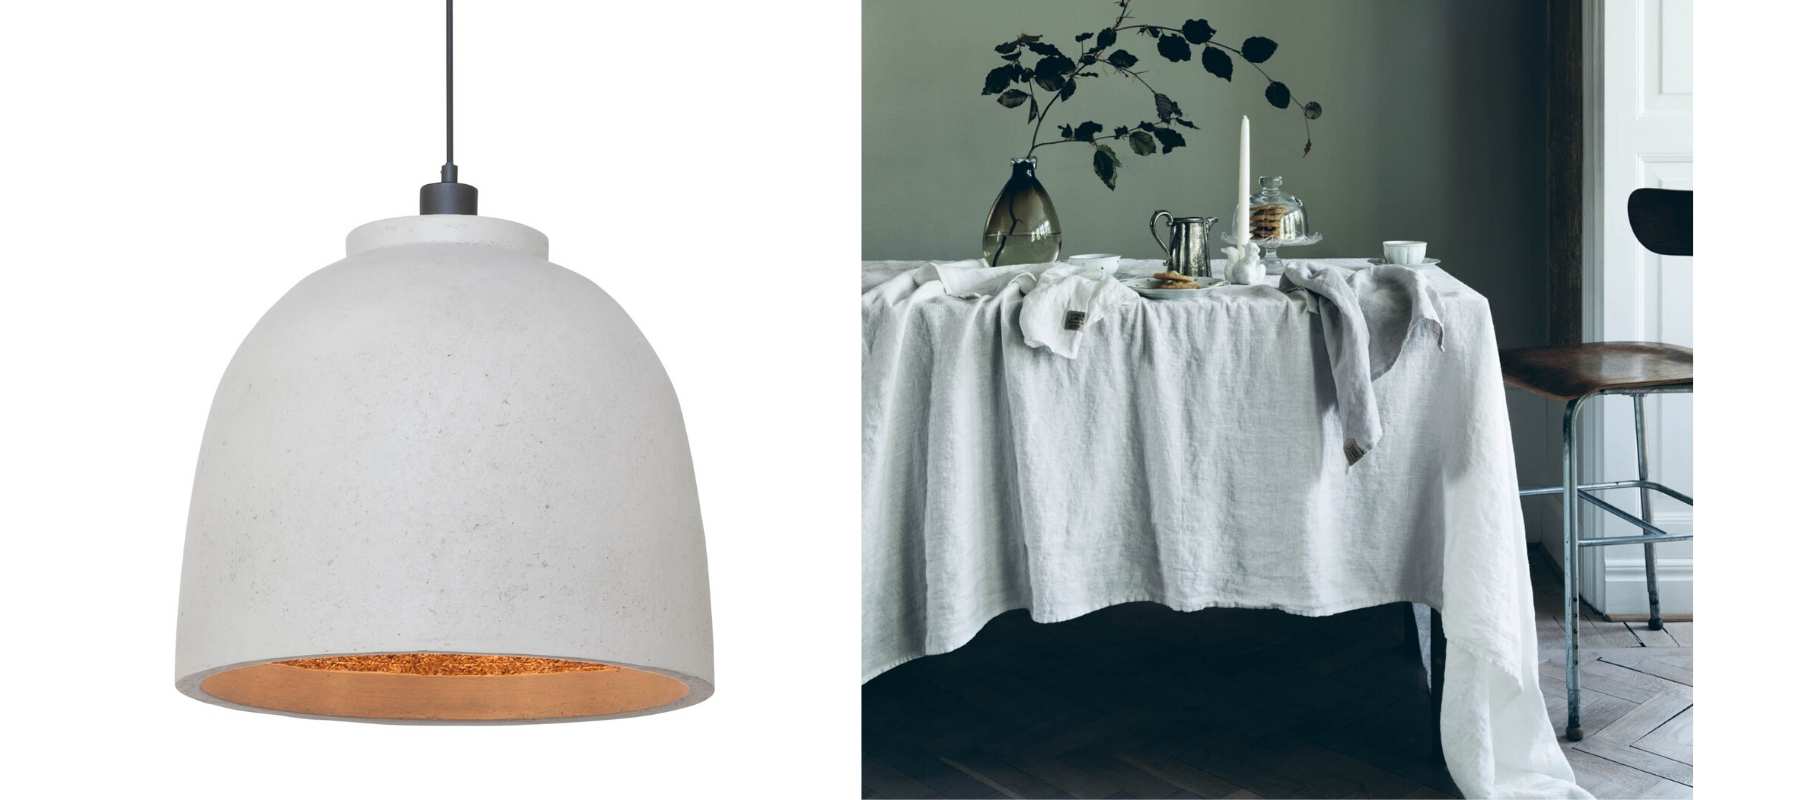 Image of white woodchip pendant ceiling light and white linen tablecloth